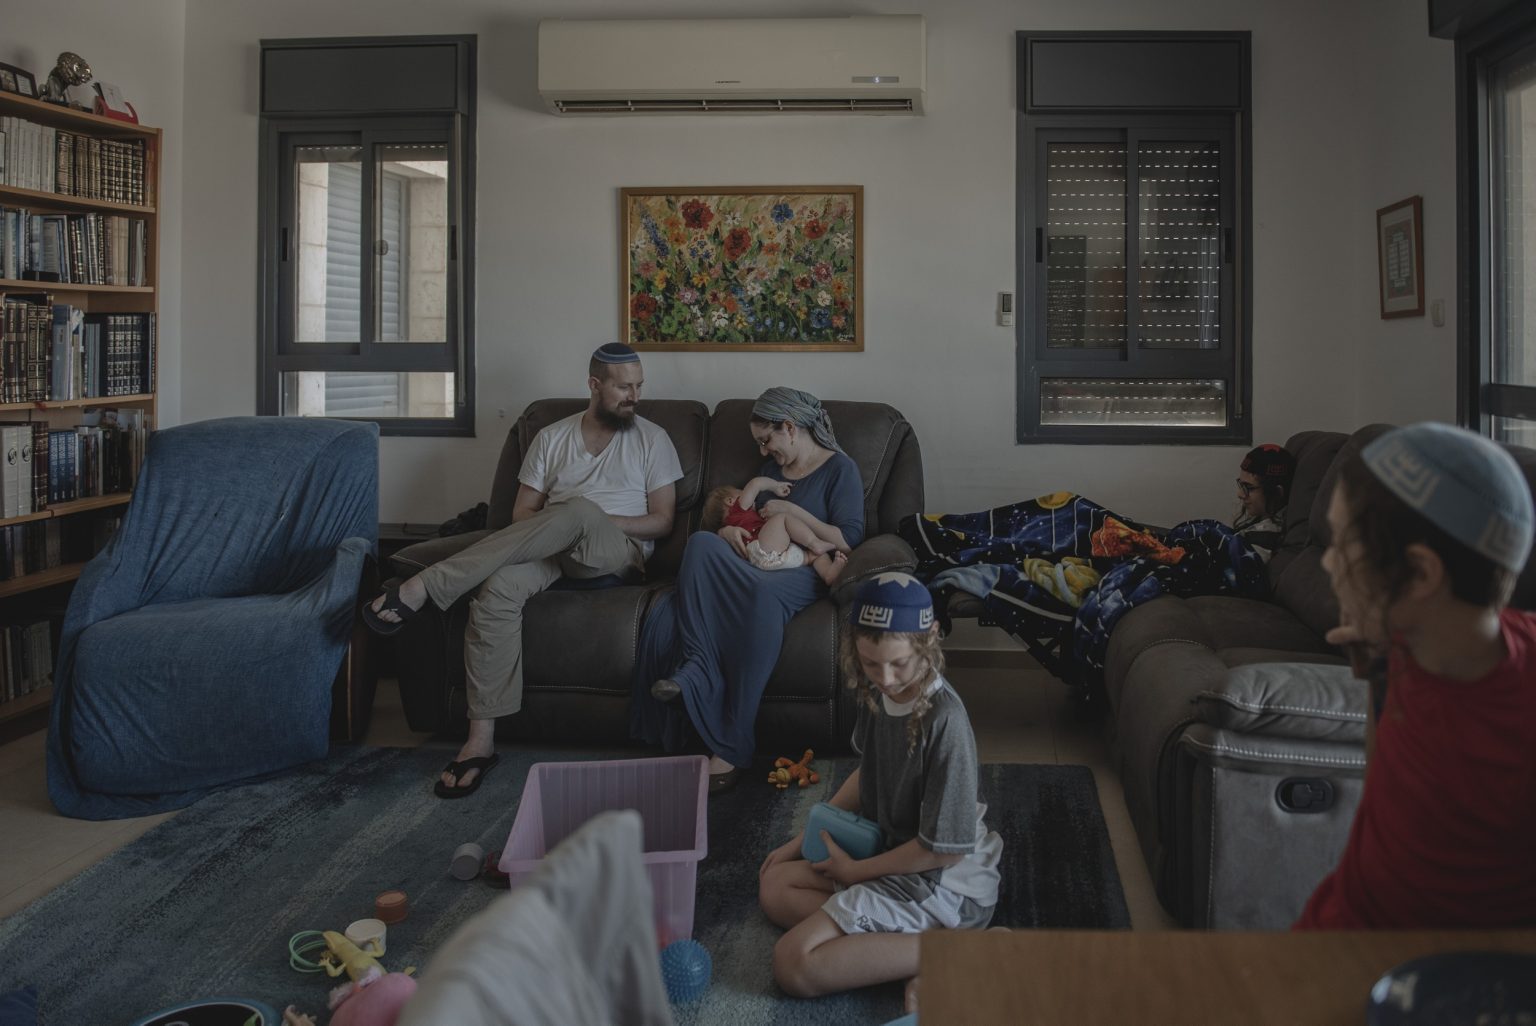 16.15604518 Daniella Levy, a novelist and self-described "ambivalent settler," at home at the Tekoa settlement in the occupied West Bank, Aug. 31, 2021.  Two journalists for The New York Times drove the length of Israel to discover what it means to be Israeli today. They met a kaleidoscope of people, searching for belonging but far apart on how to find it. (Laetitia Vancon/The New York Times)     <span style="color: #ff0000">*** SPECIAL   FEE   APPLIES ***</span> *** Local Caption *** 16.15604518